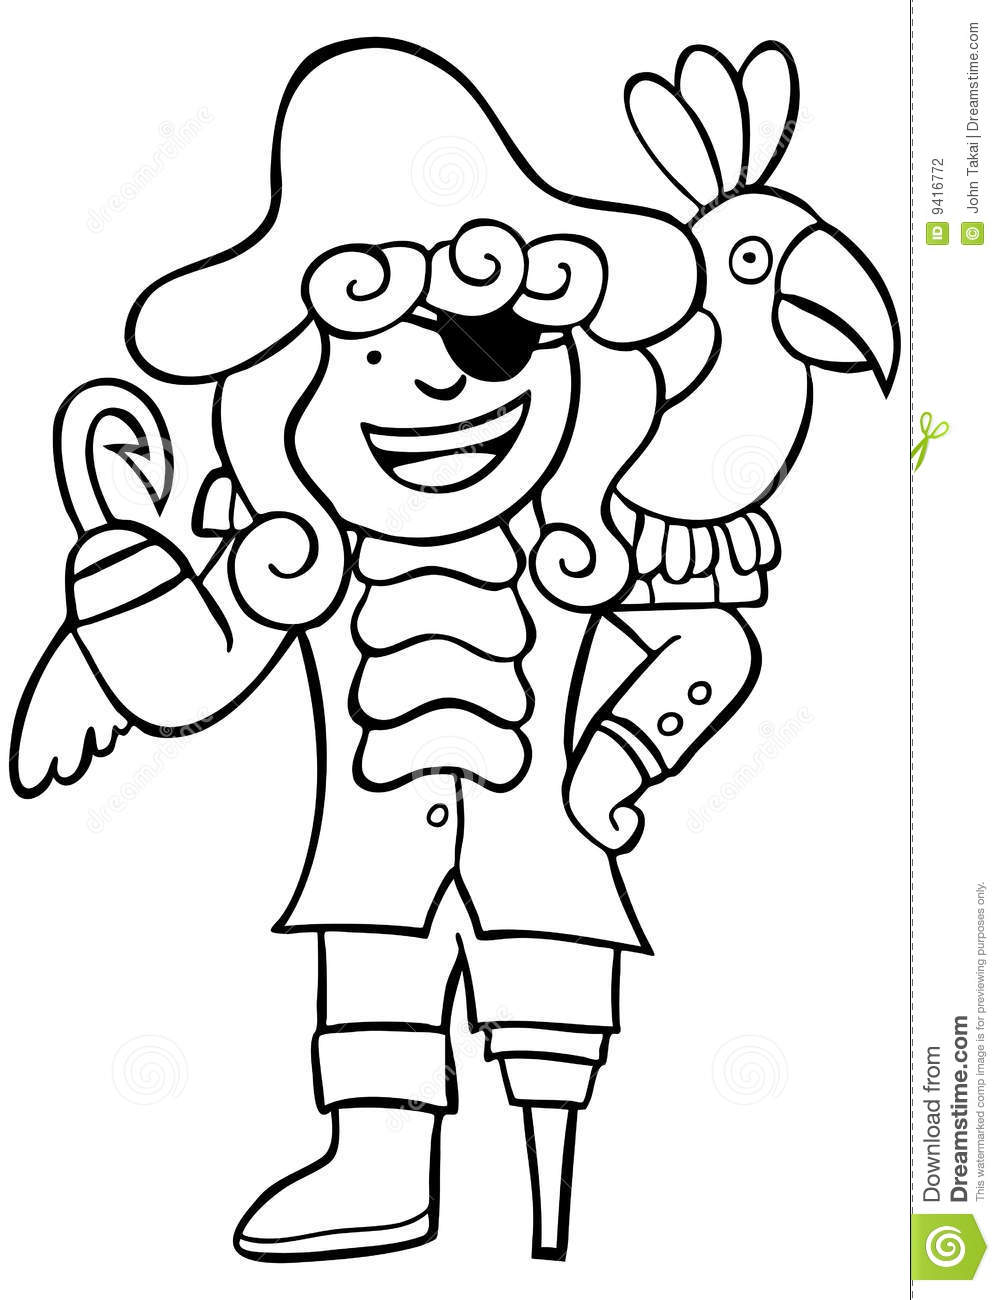 Black And White Pirate Clipart & Clip Art Images #32392.